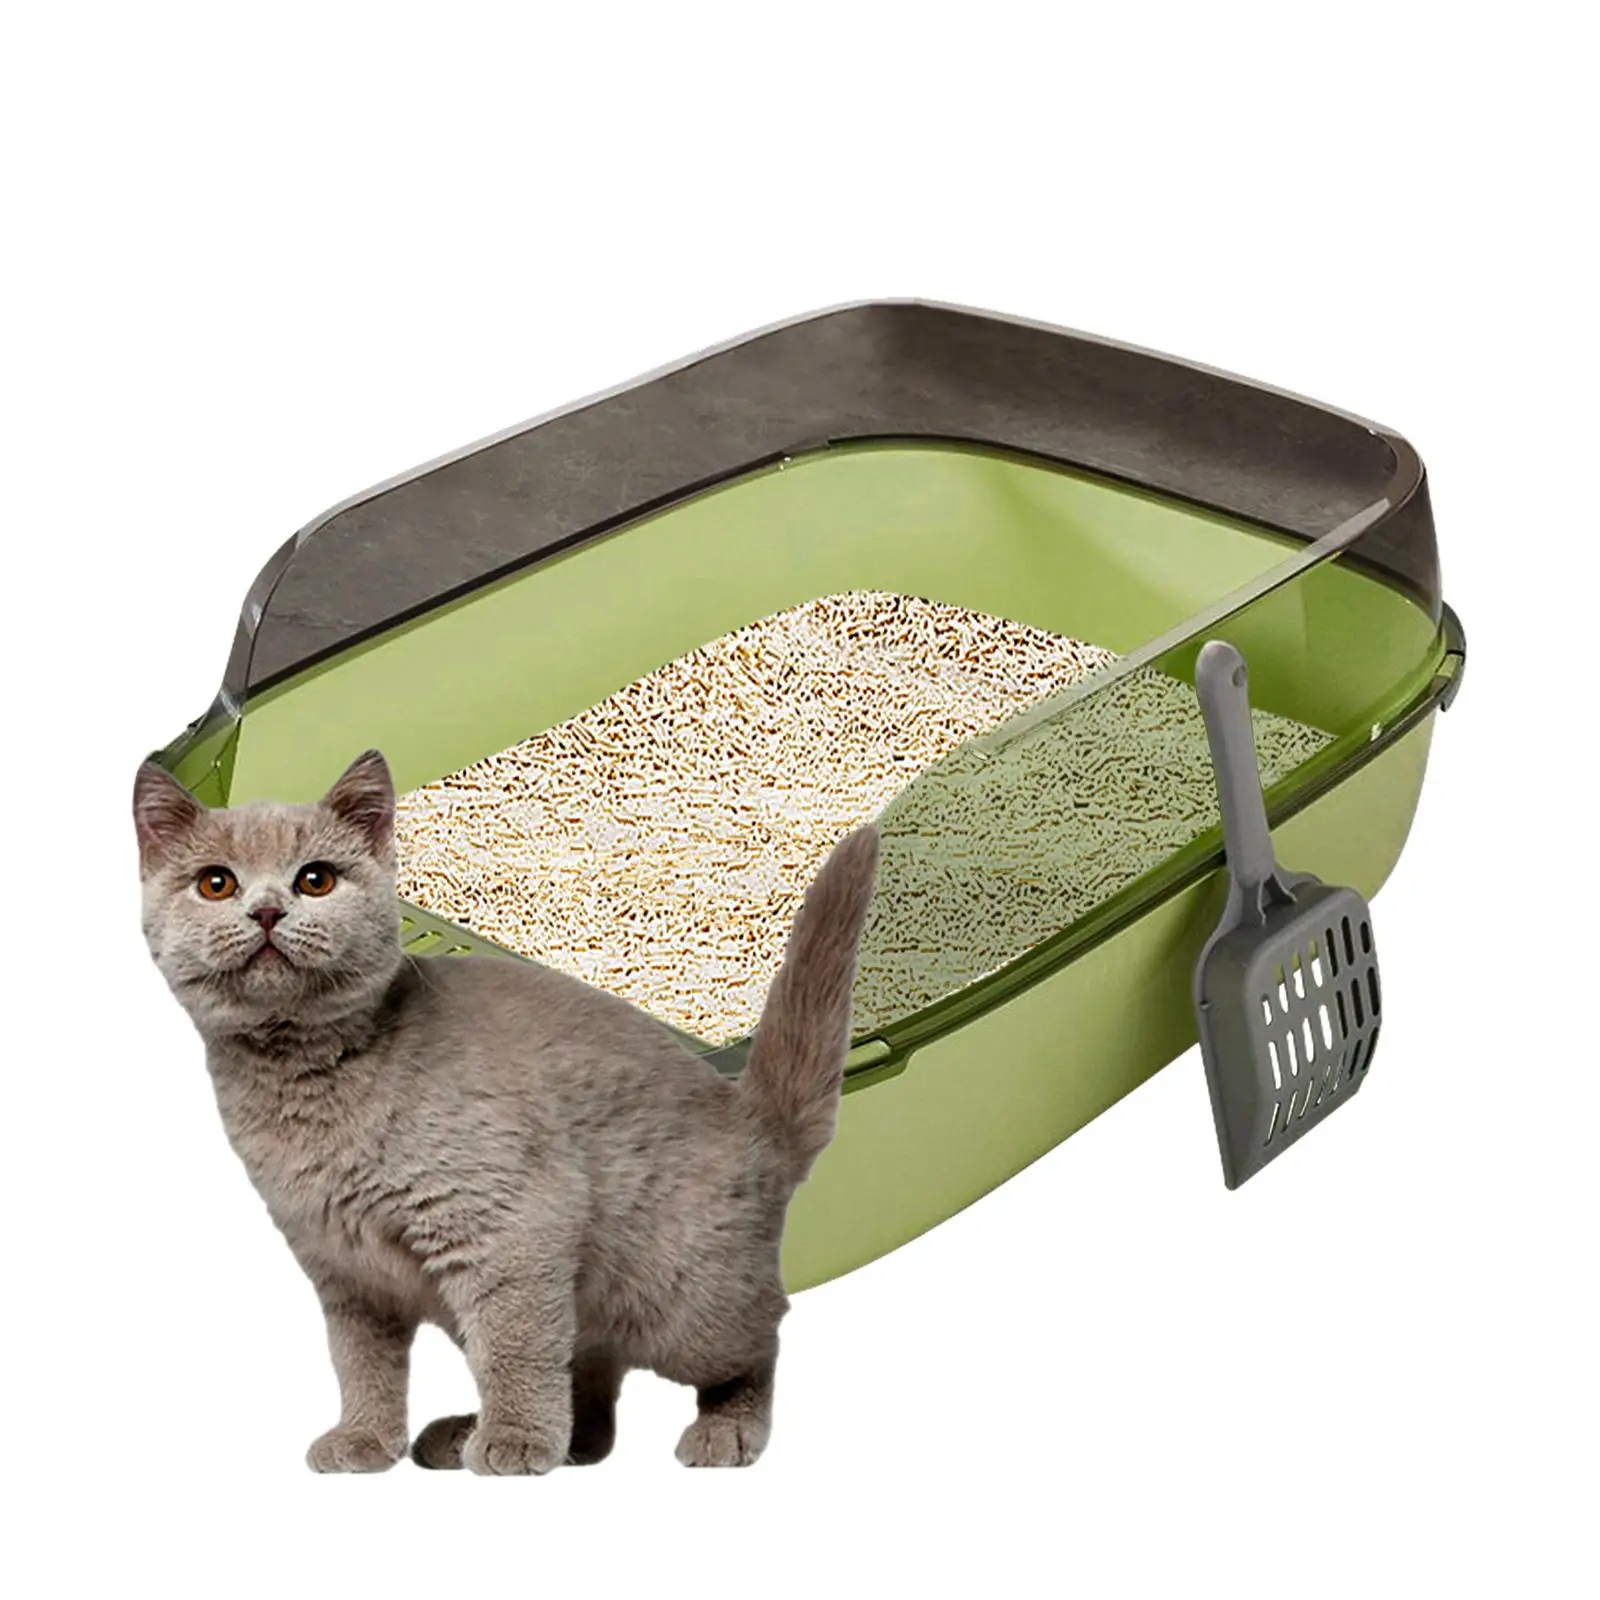 Cat Litter Box Sturdy Semi Enclosed Easy to Clean Litter Tray Cat Kitty